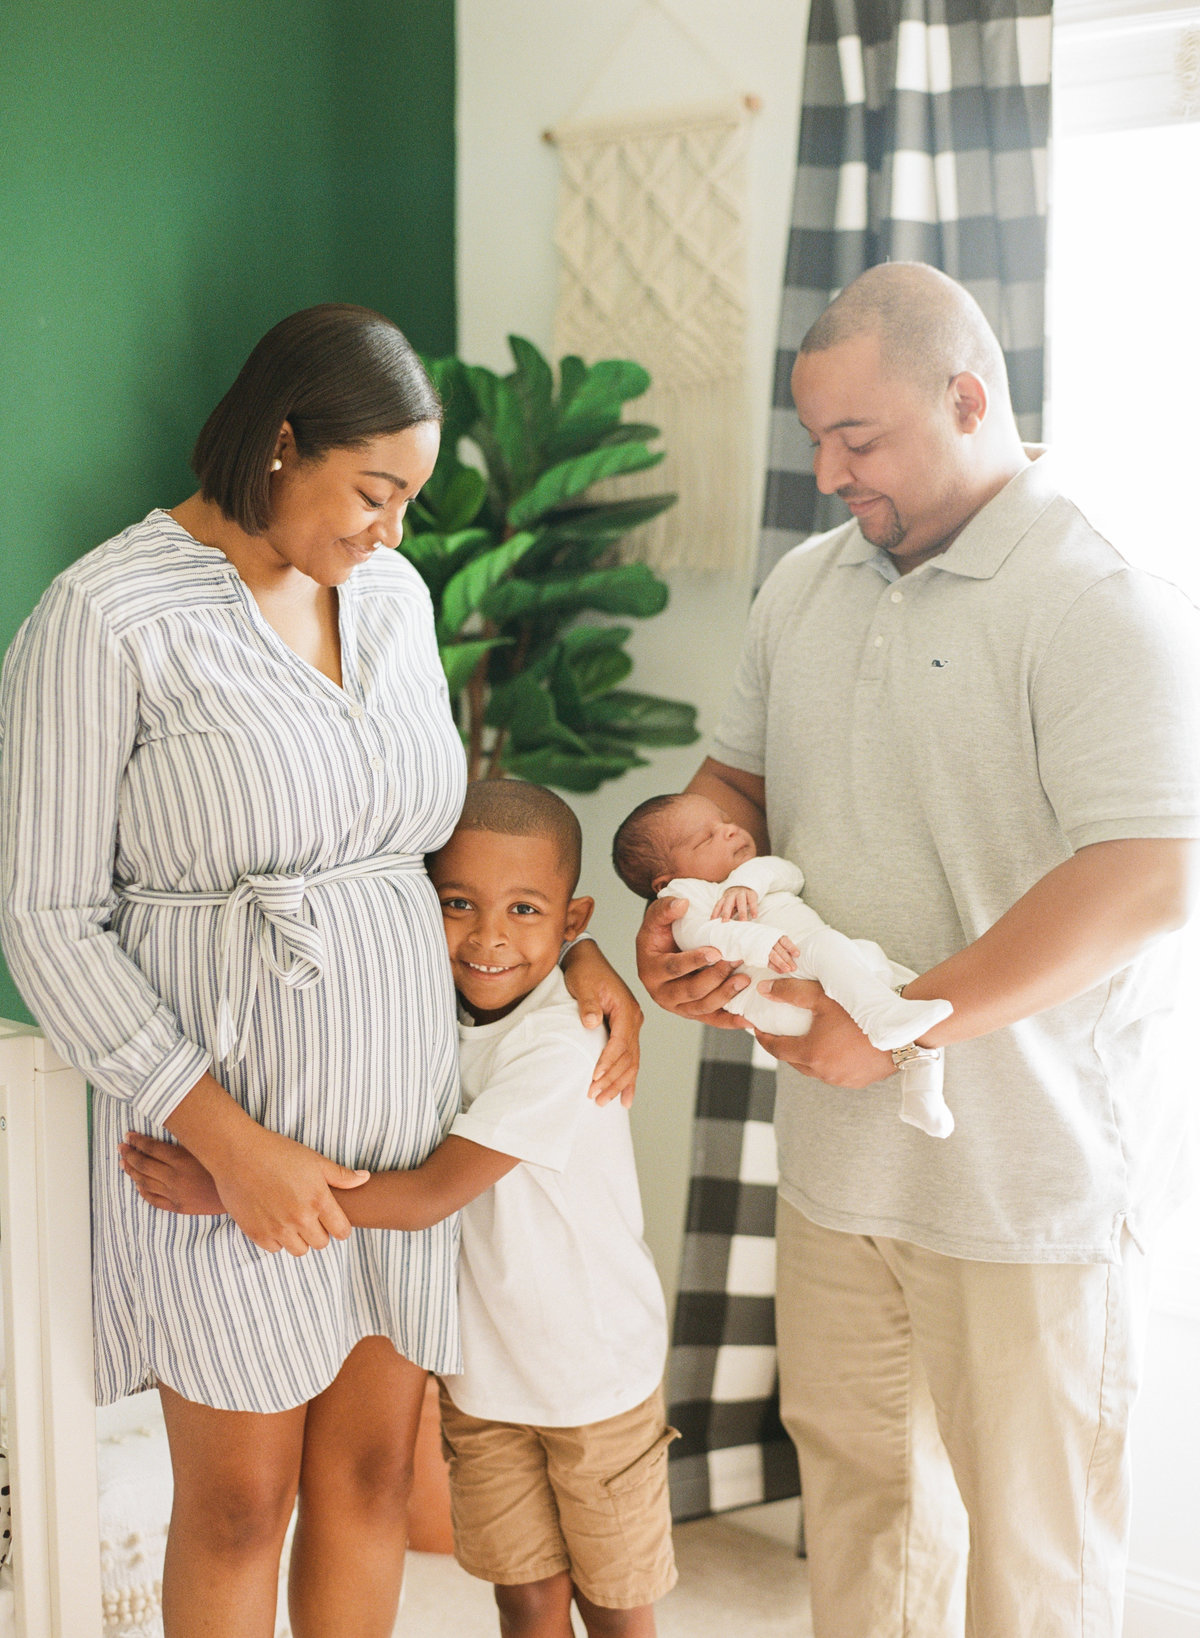 Family photo during a newborn session in Raleigh in an Emerald Green nursery. Photographed by newborn photographers Raleigh A.J. Dunlap Photography.